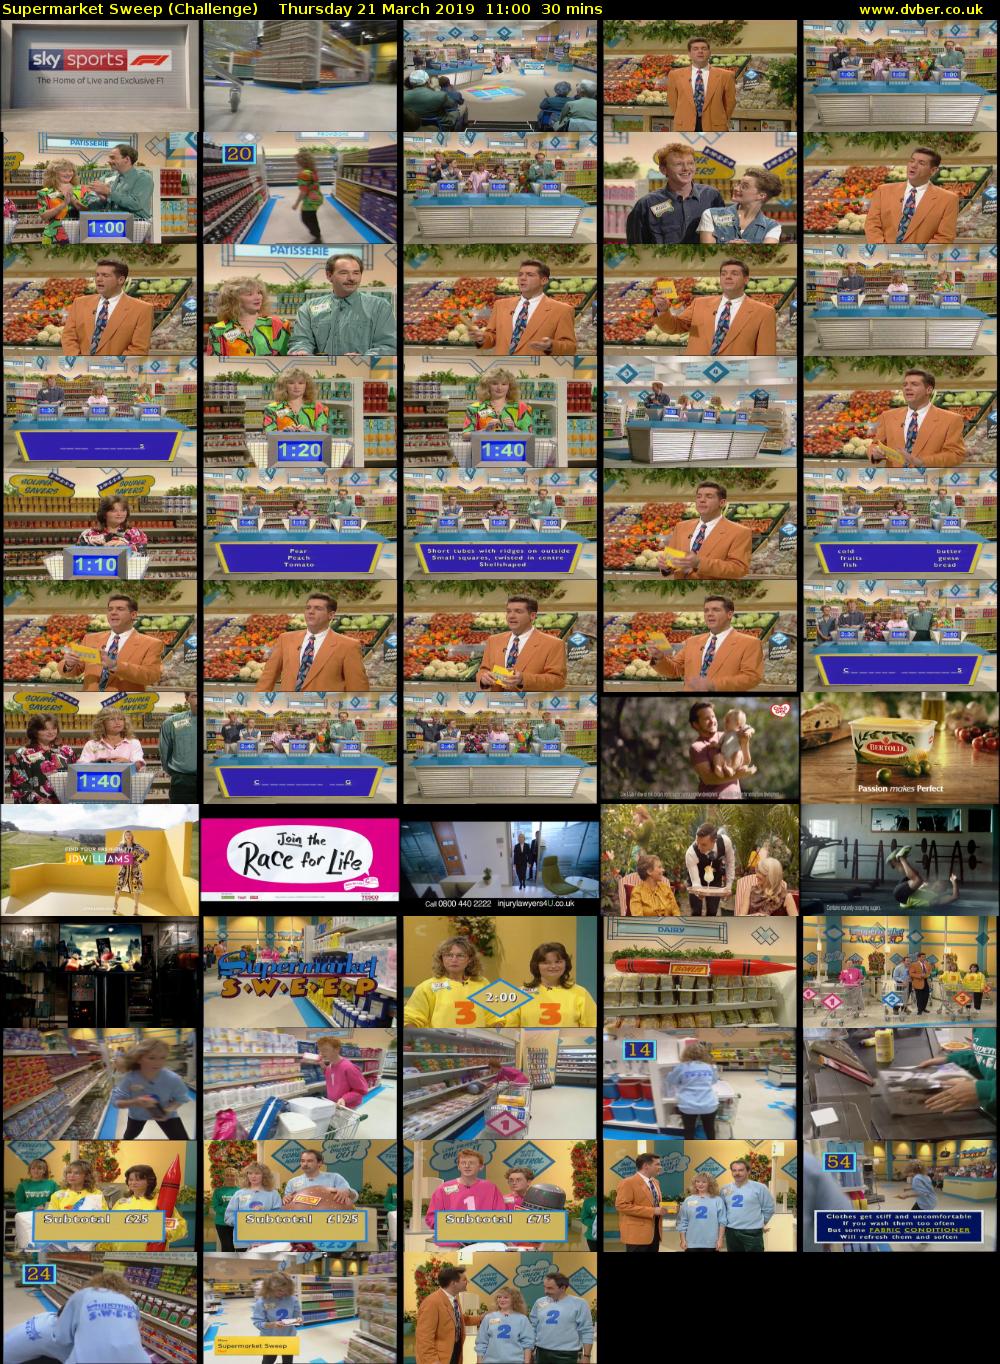 Supermarket Sweep (Challenge) Thursday 21 March 2019 11:00 - 11:30